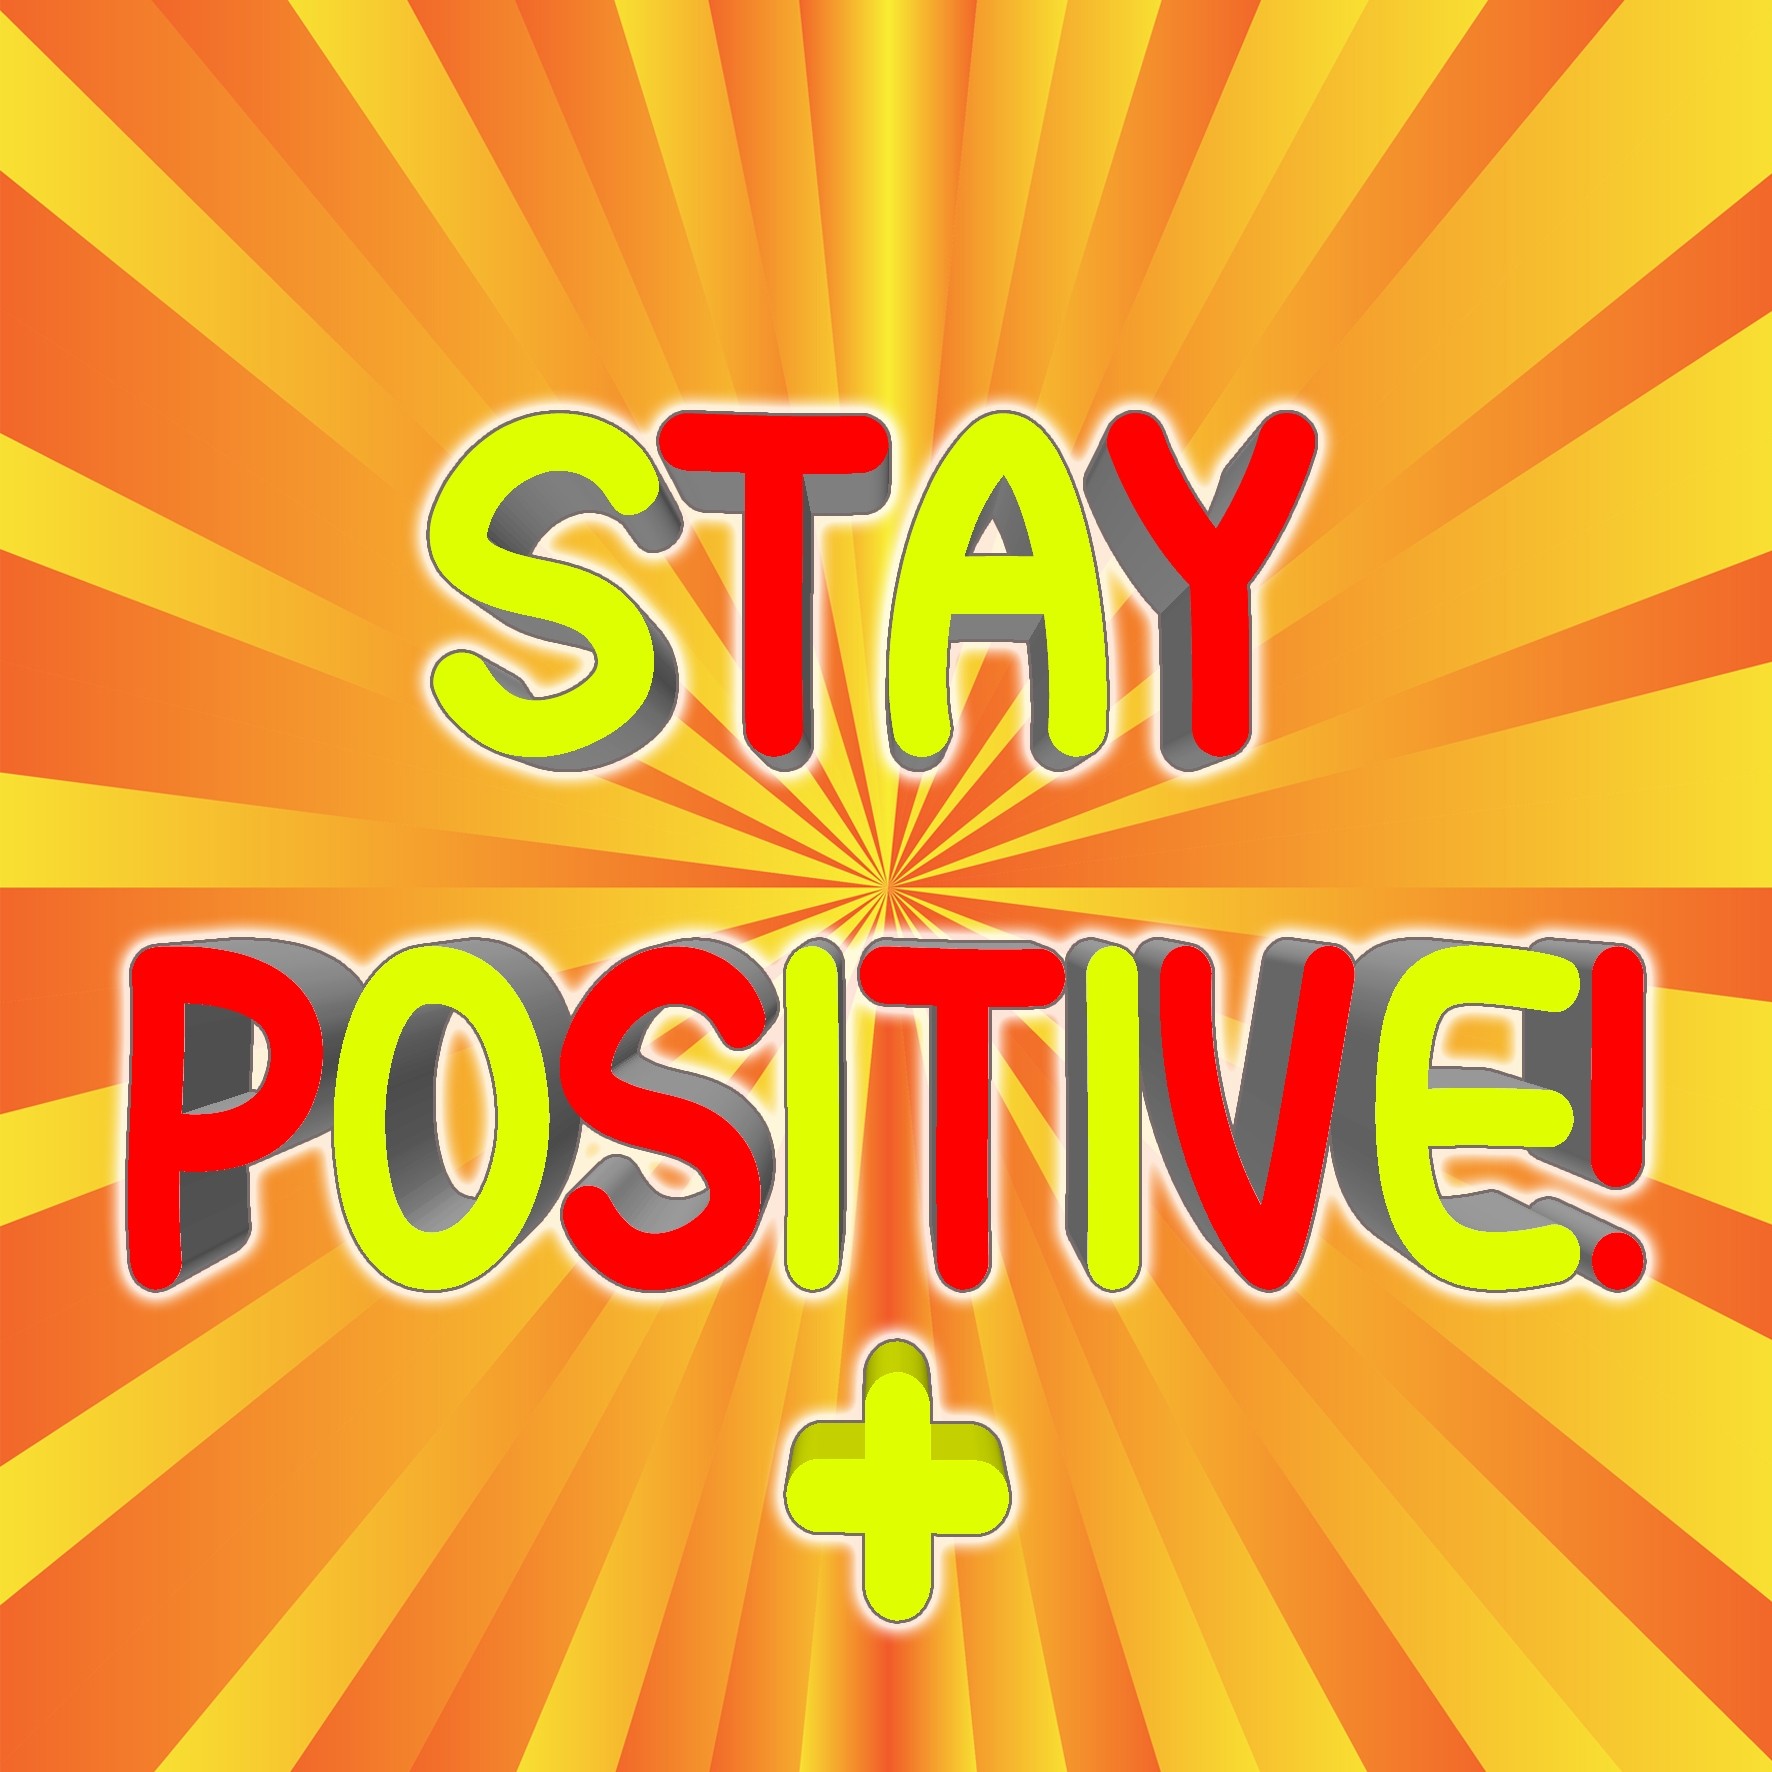 Inspirational Motivational Greeting Card (Stay Positive)